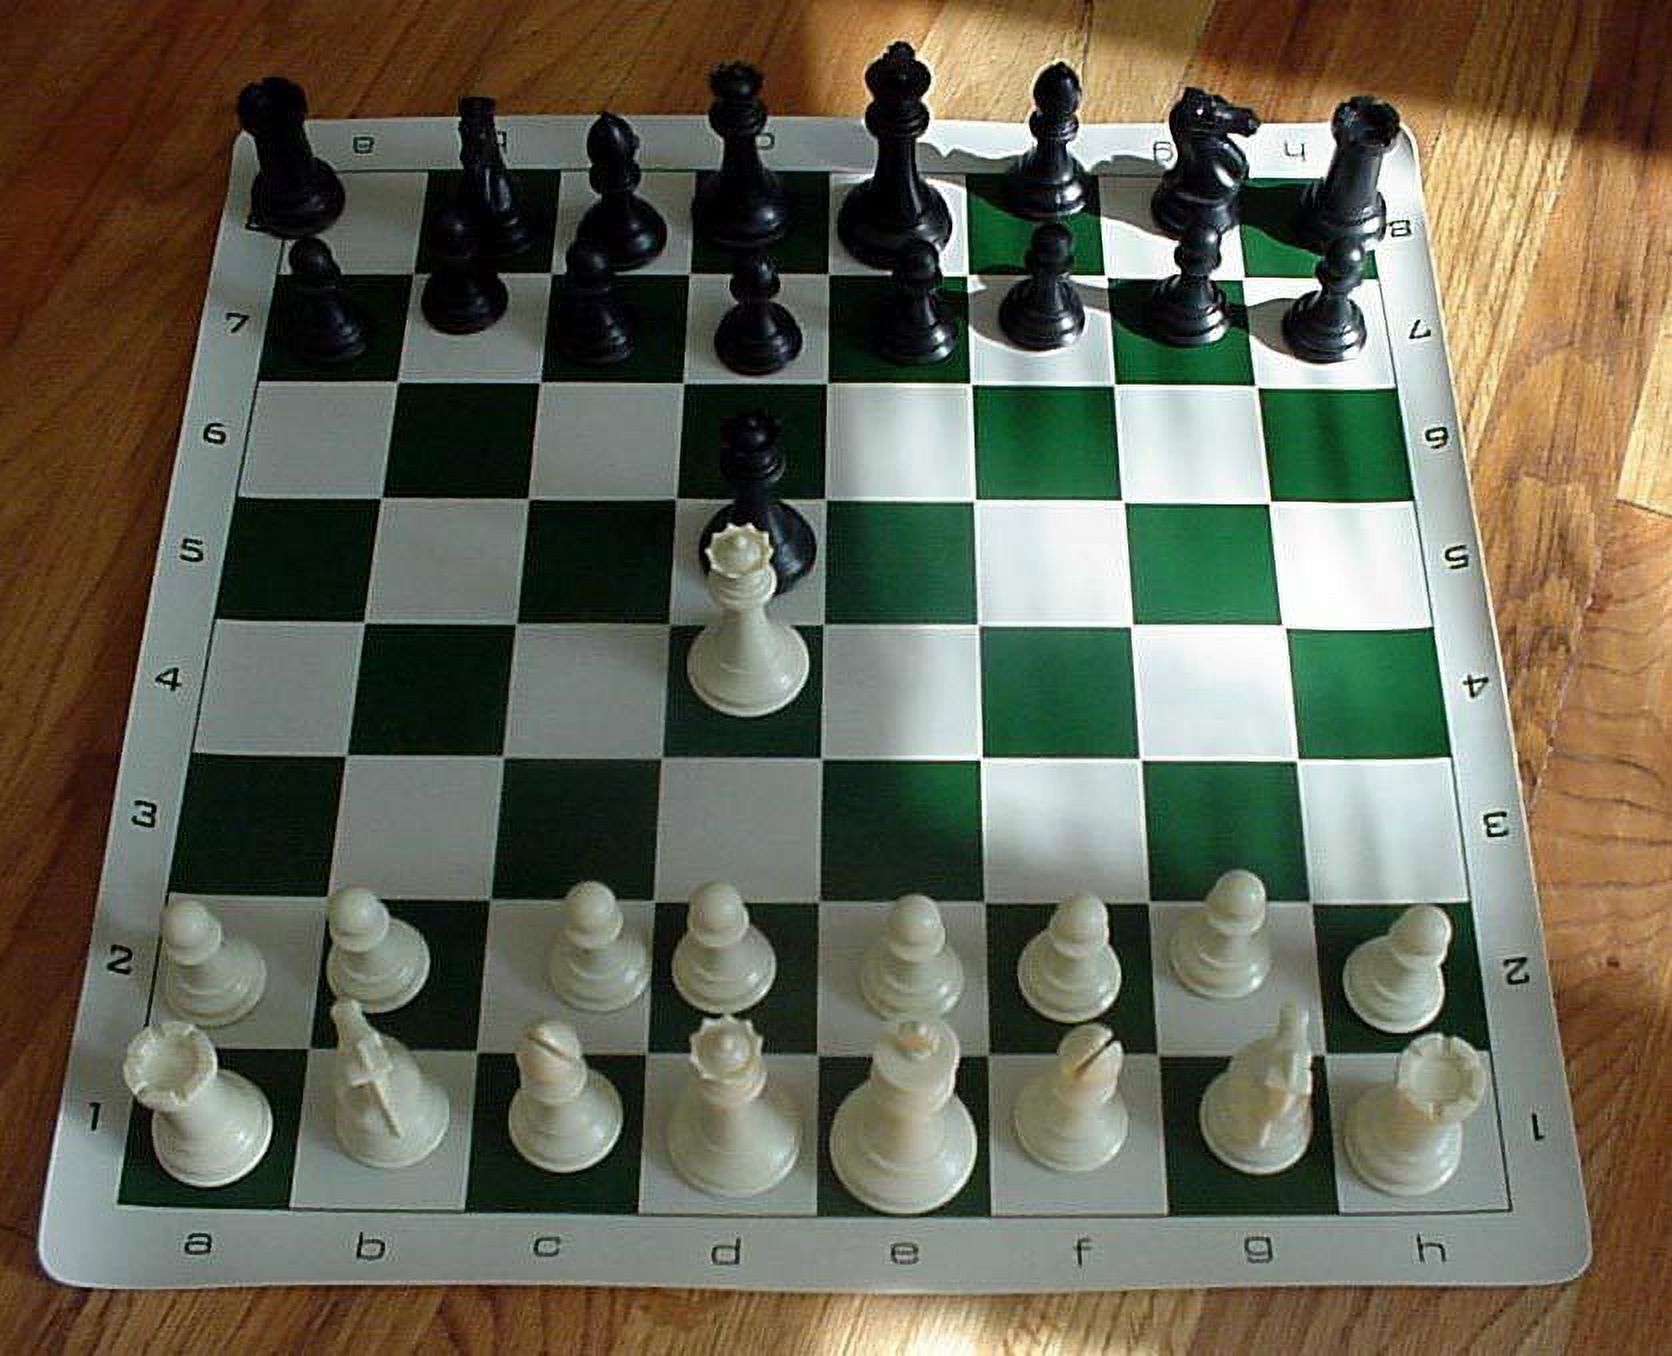 Tournament Chess Set - Extra Large & Heavy 4 Luxury Chess Pieces (  Ivory/Black) with Green/White Roll-up Chess Board